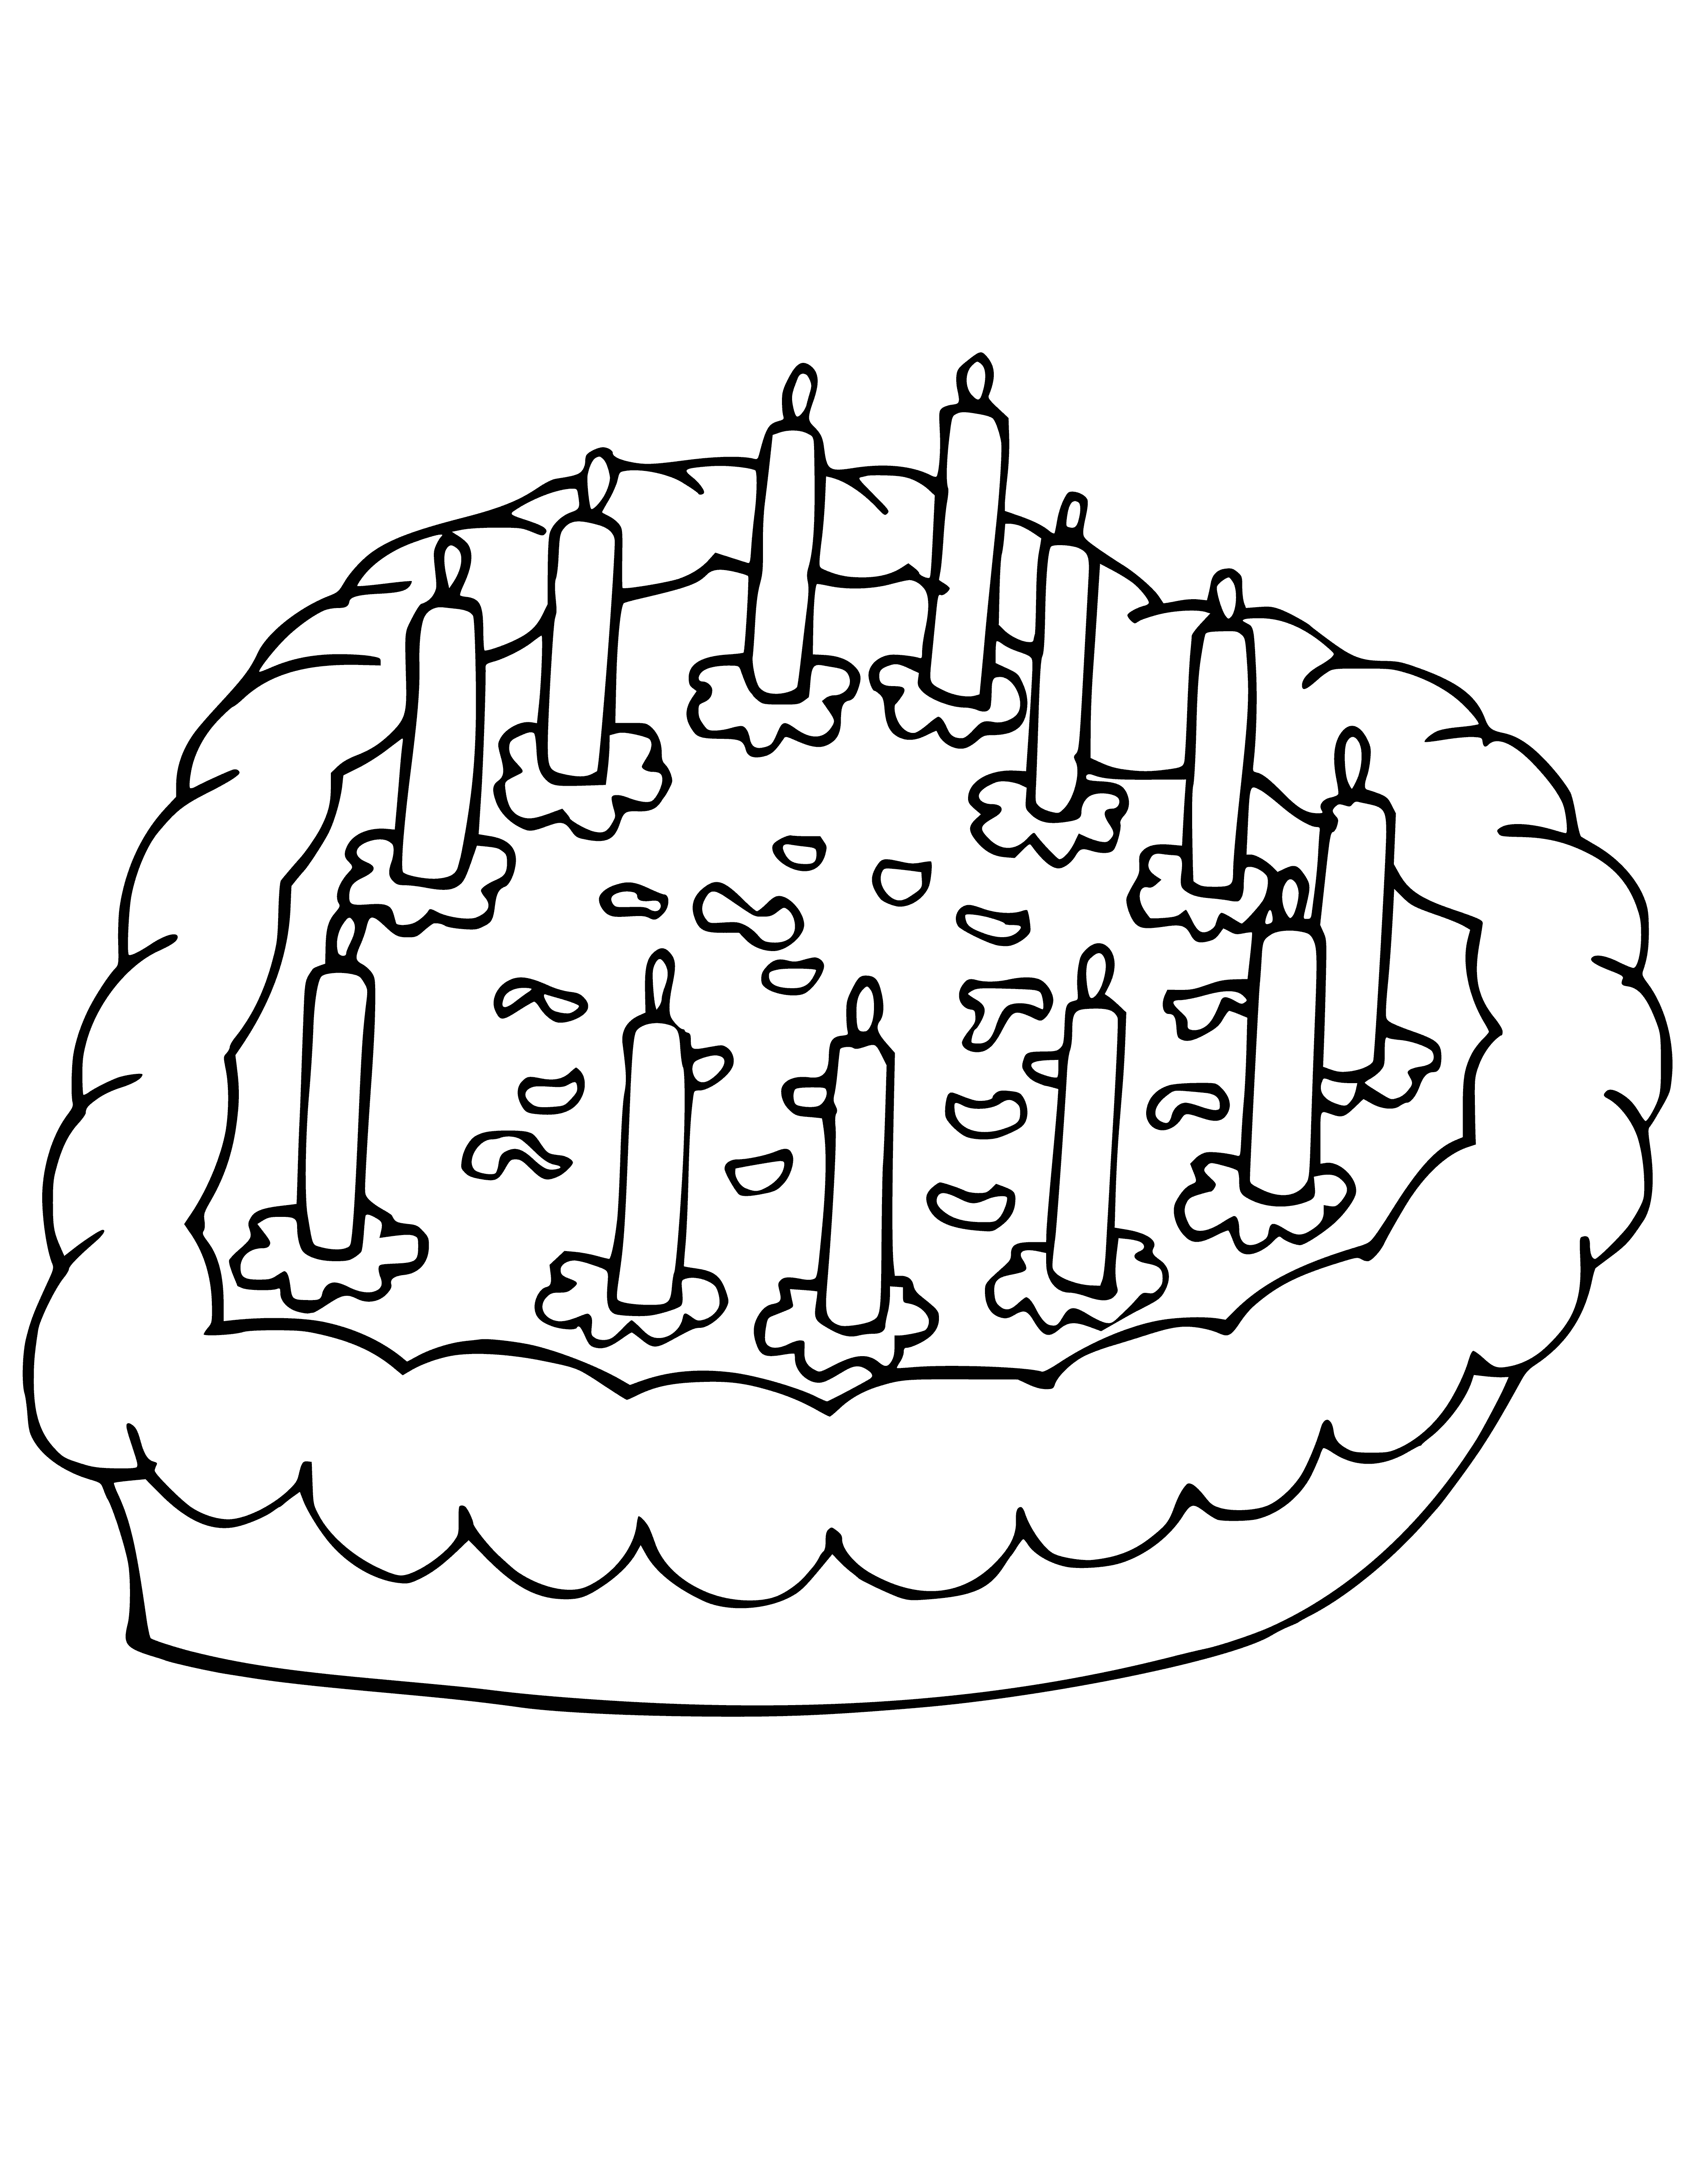 coloring page: Round 6-layer cake w/ top pink, 2nd & 4th red, 5th pink, bottom white; adorned w/ red & pink roses + gold ring on top.